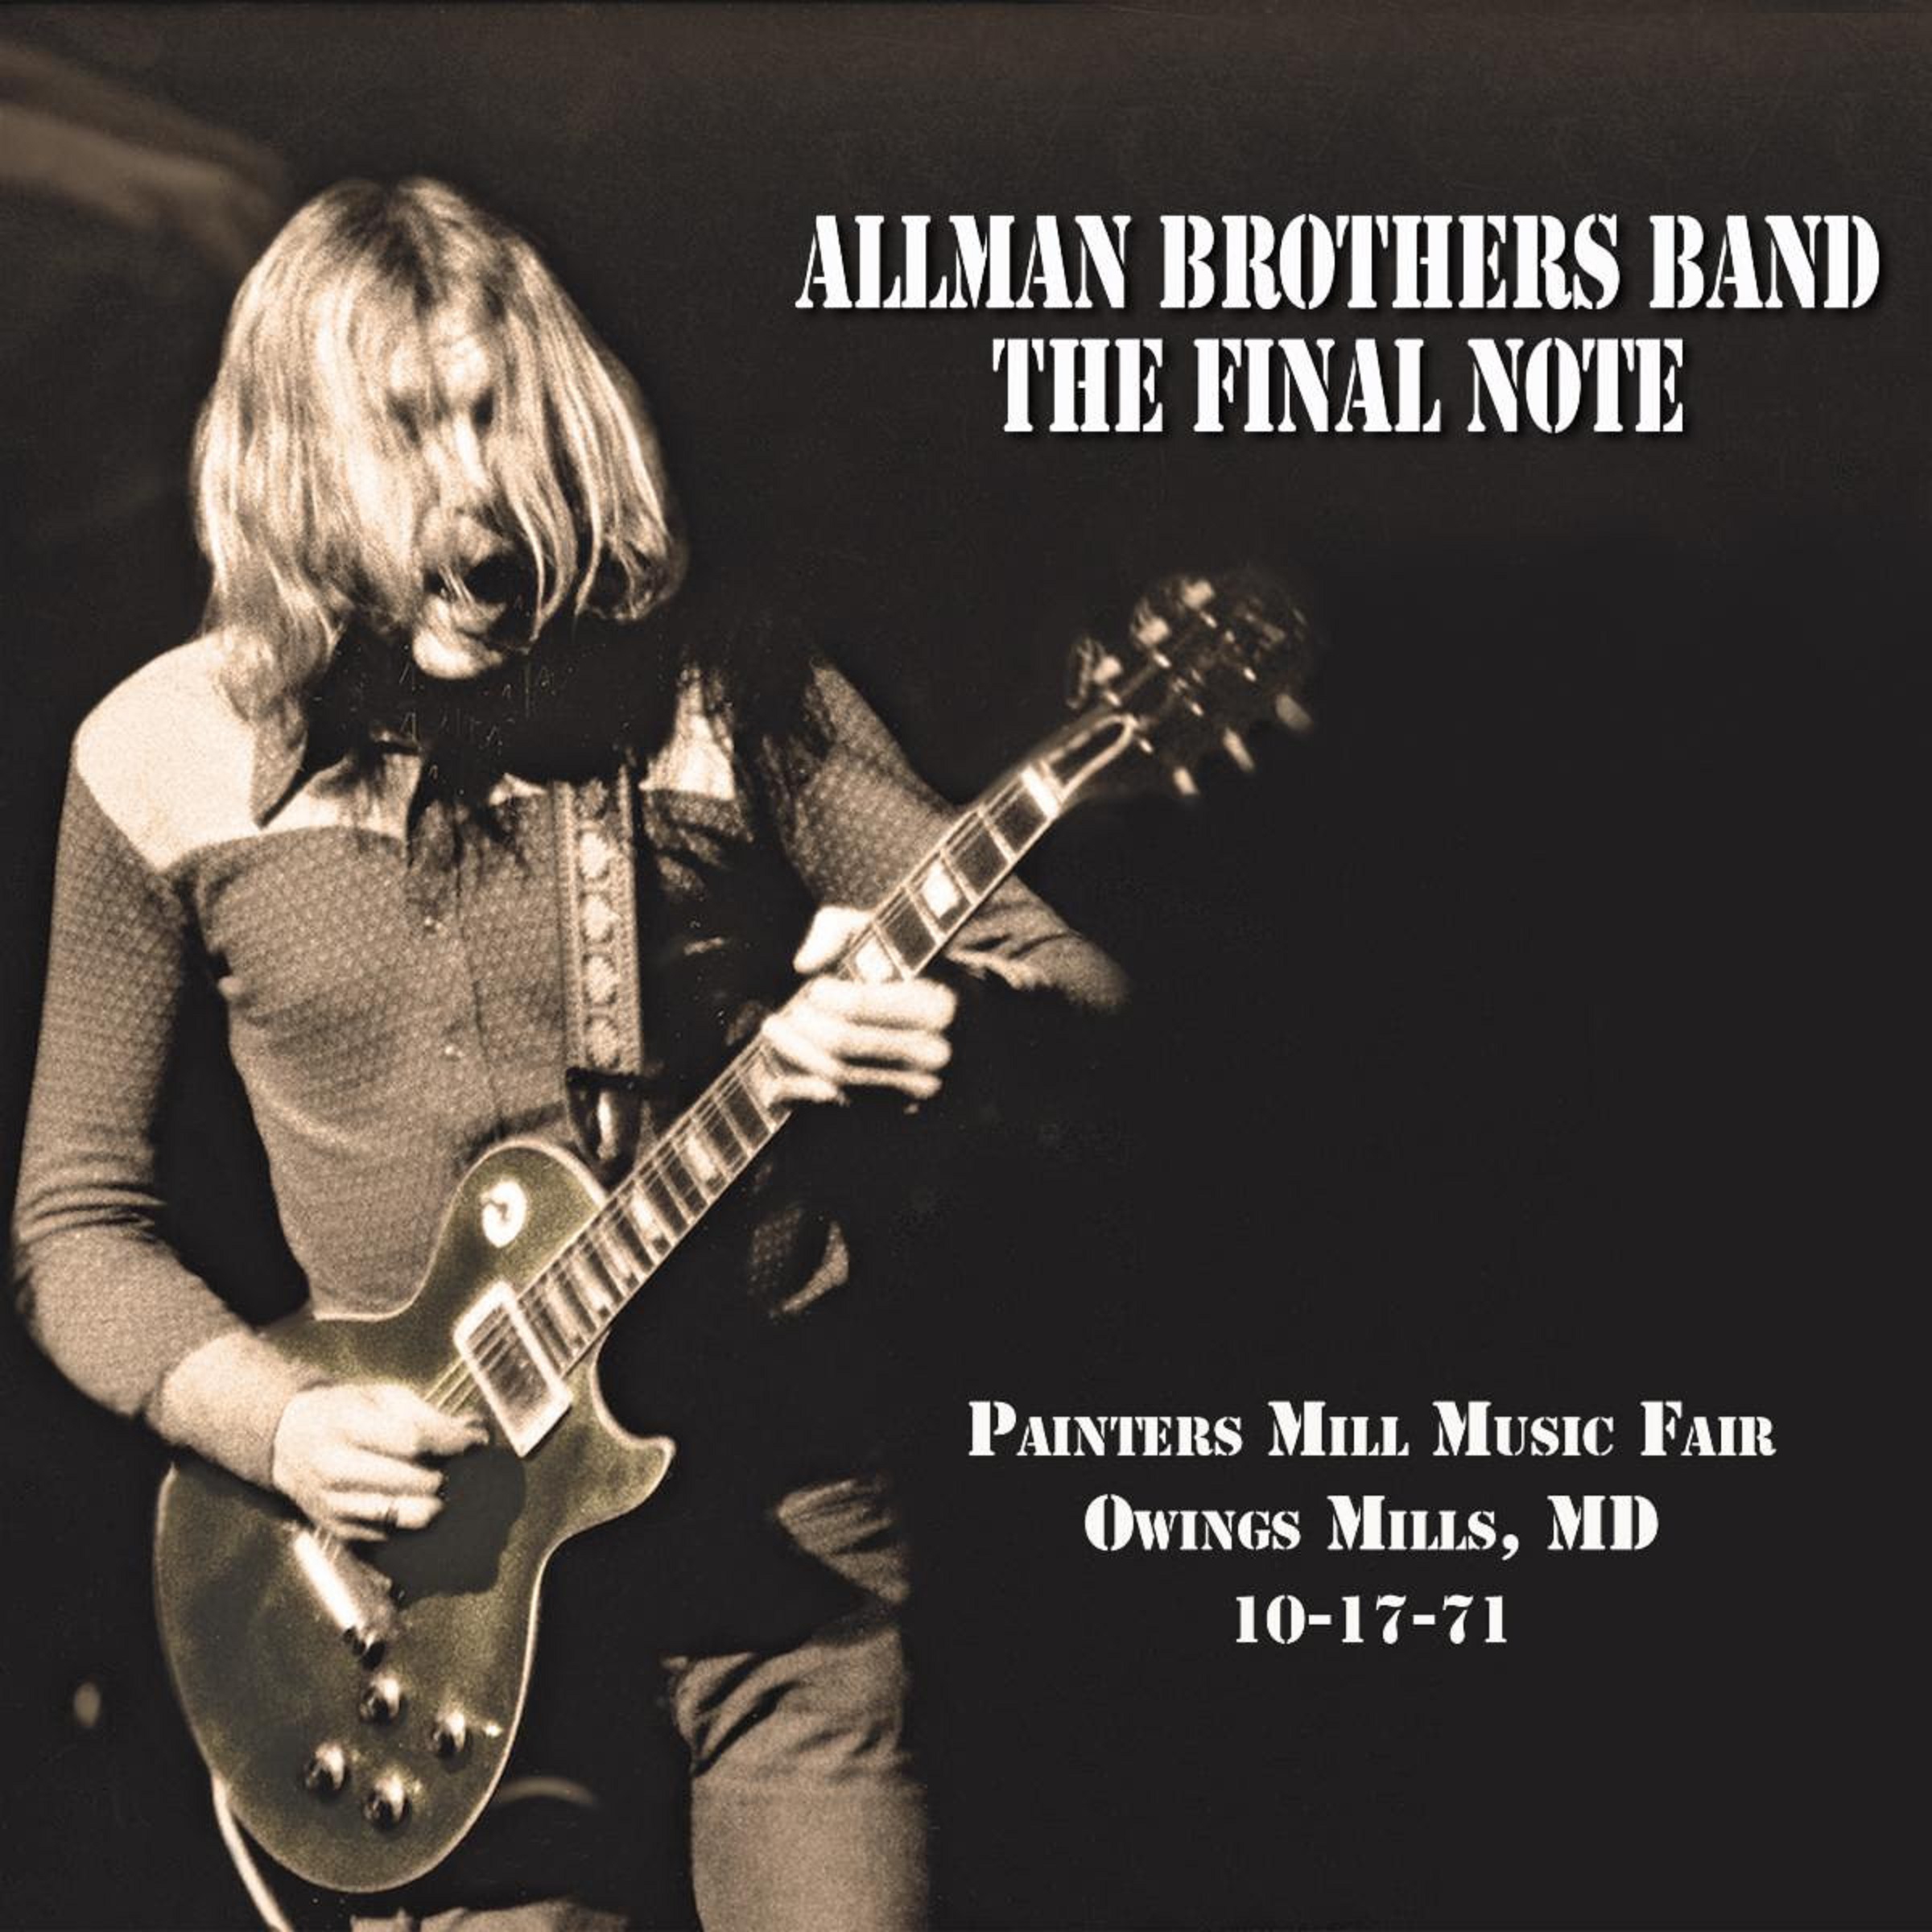 Allman Brothers Band's Final Note On Vinyl For Record Store Day